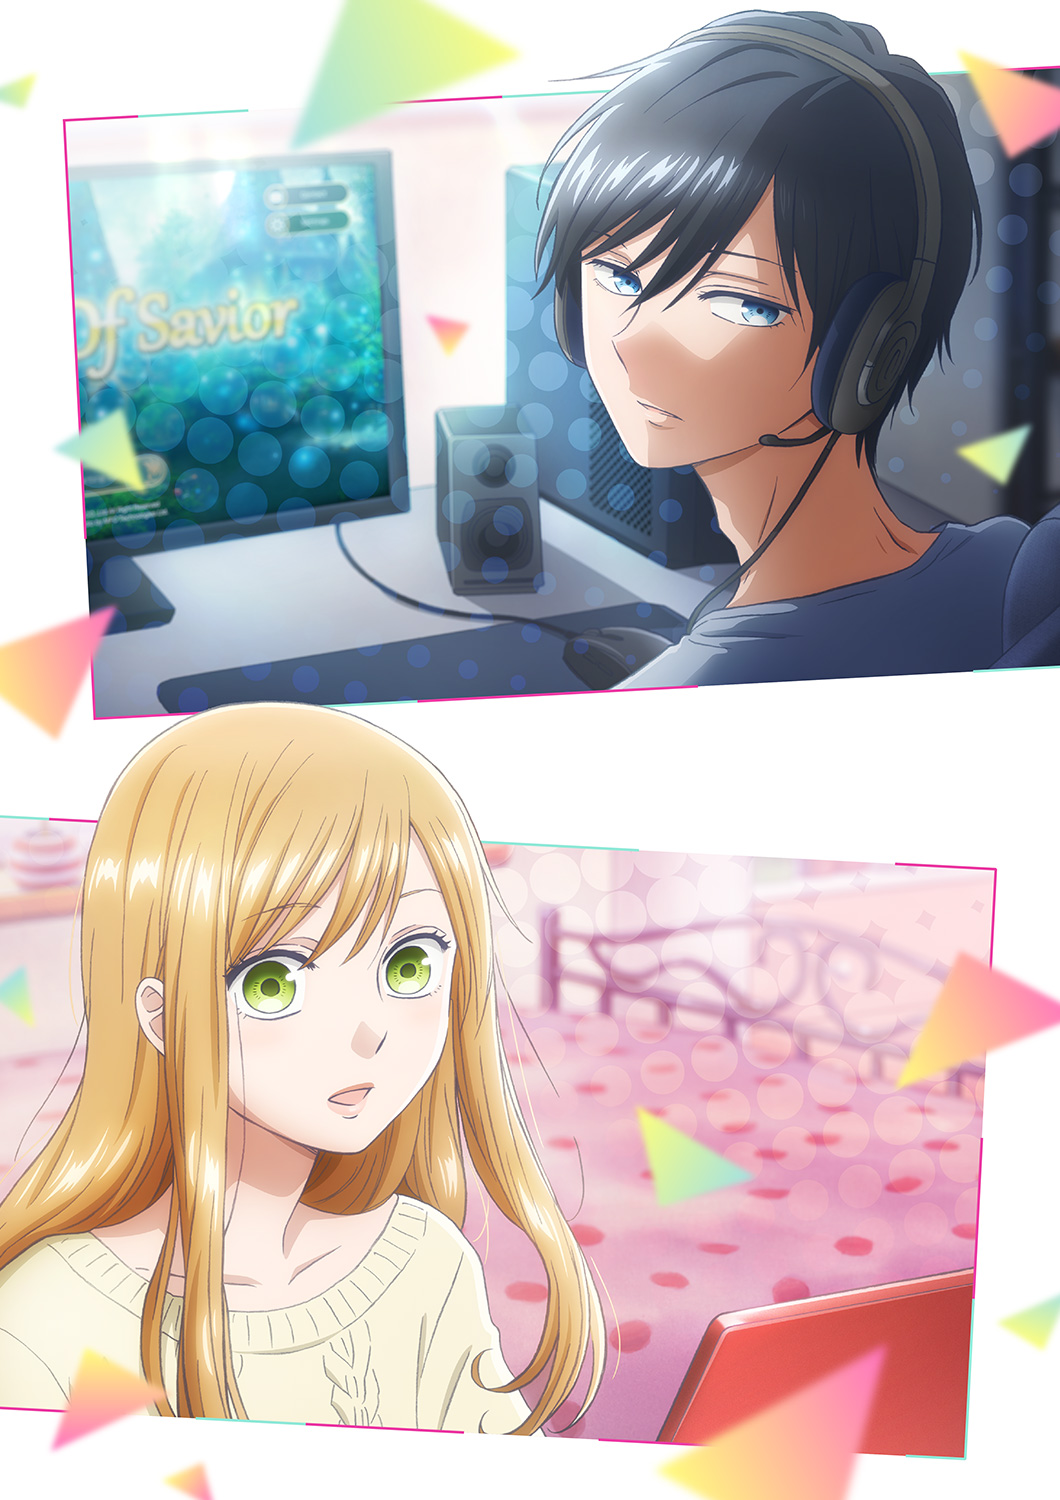 My Love Story With Yamada-kun At Lv999 Anime Releases First